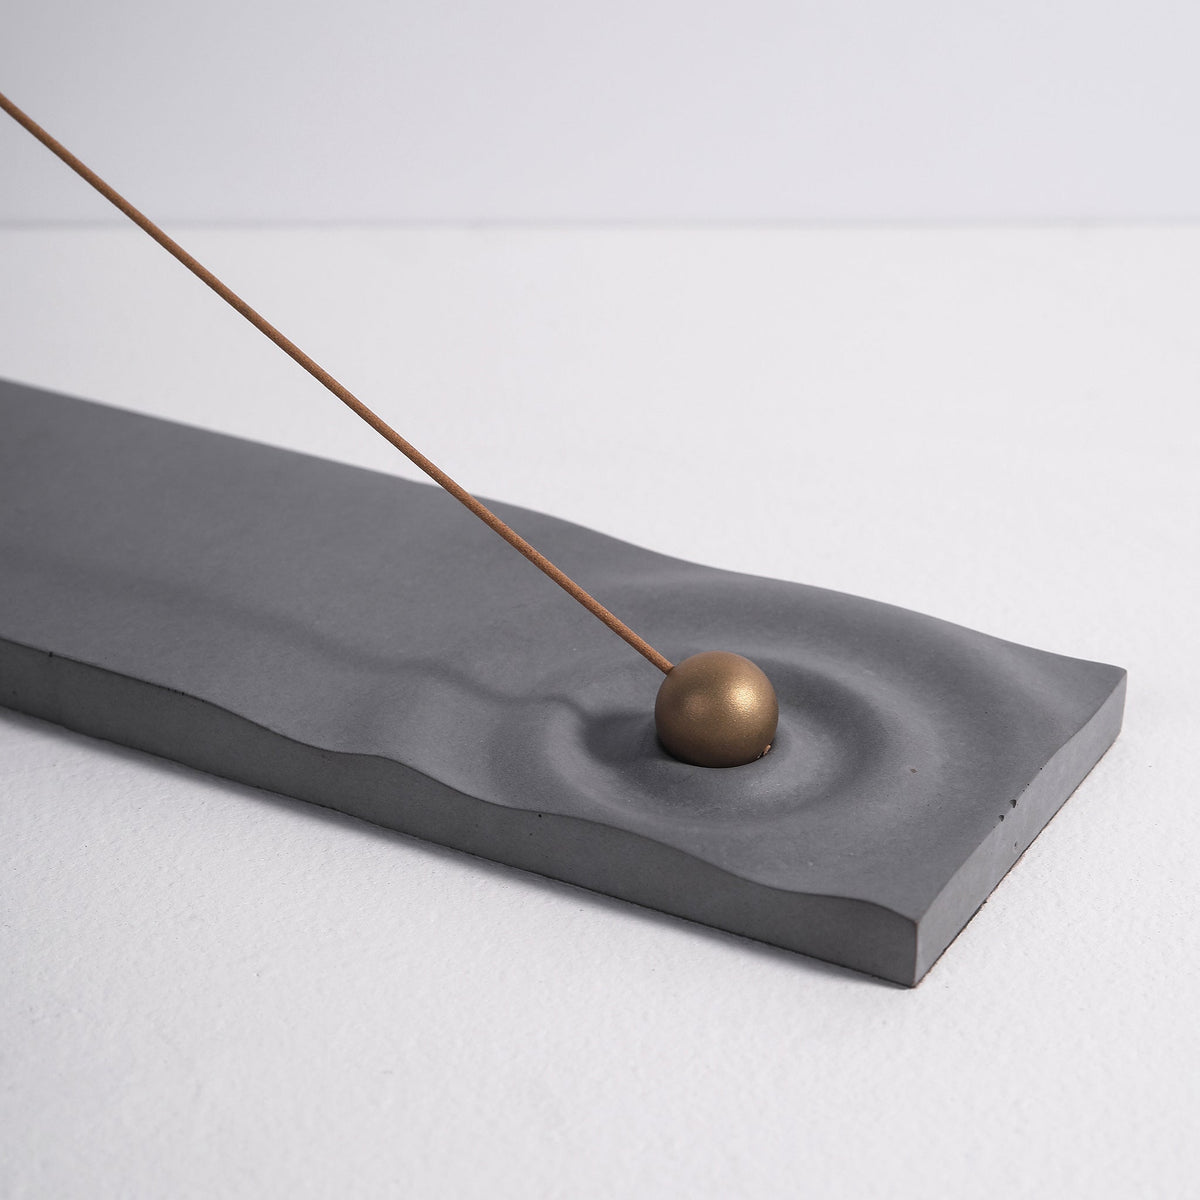 Ripple incense burner in gray by Kin Objects close up